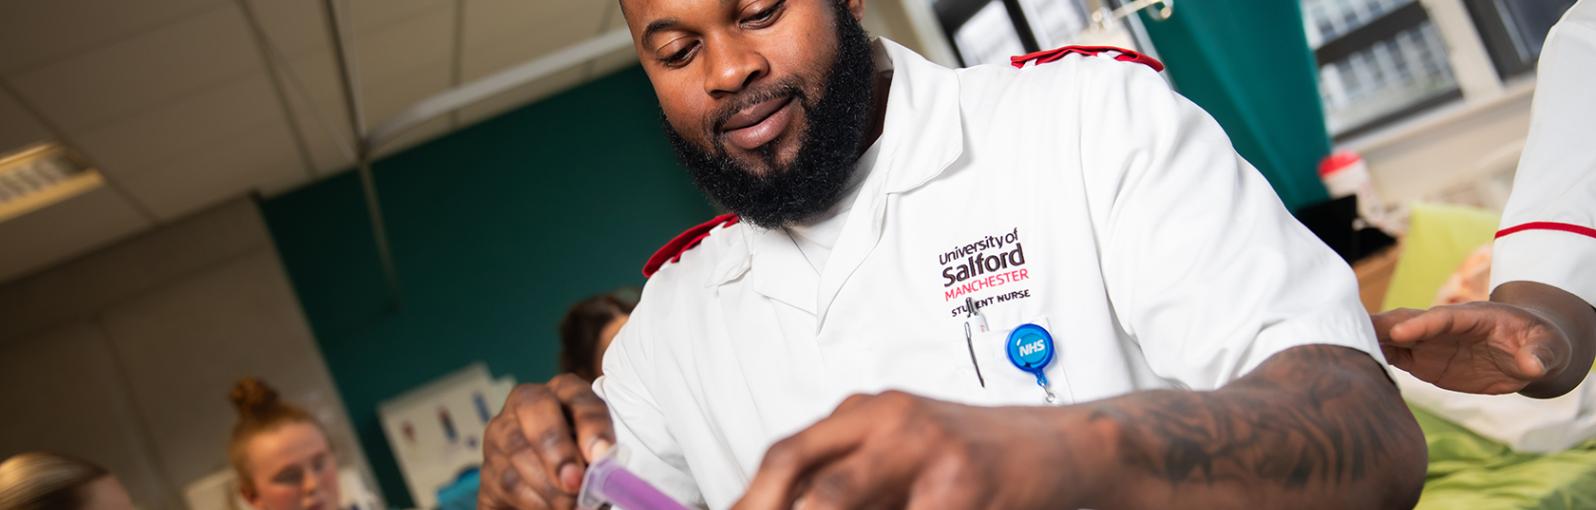 Nursing student uses a syringe to measure out medicine from a bottle